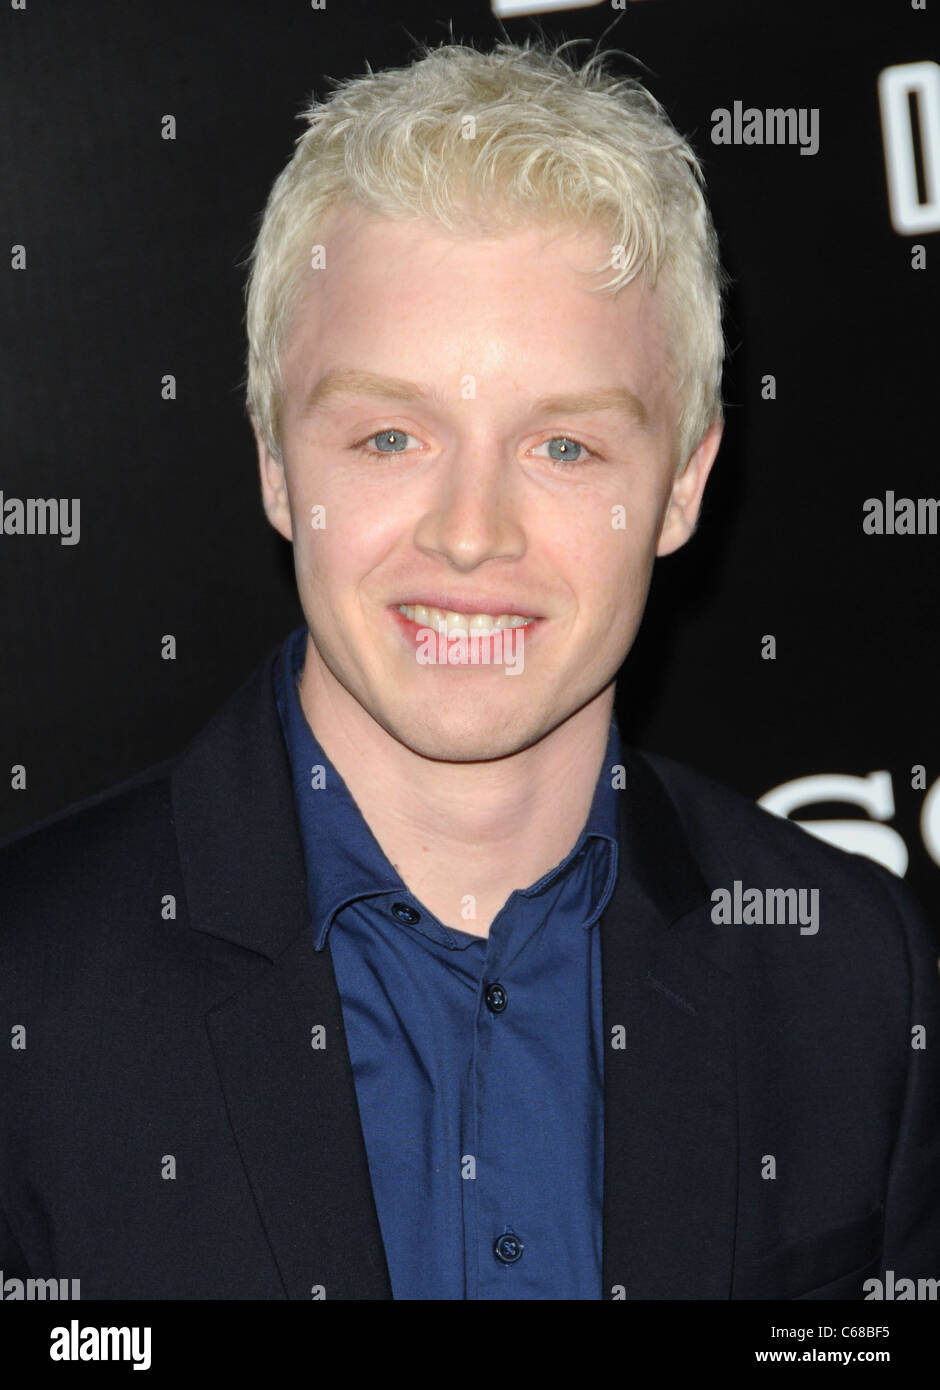 Noel Fisher at arrivals for BATTLE: LOS ANGELES Premiere, Regency Village Theater, Los Angeles, CA March 8, 2011. Photo By: Dee Stock Photo